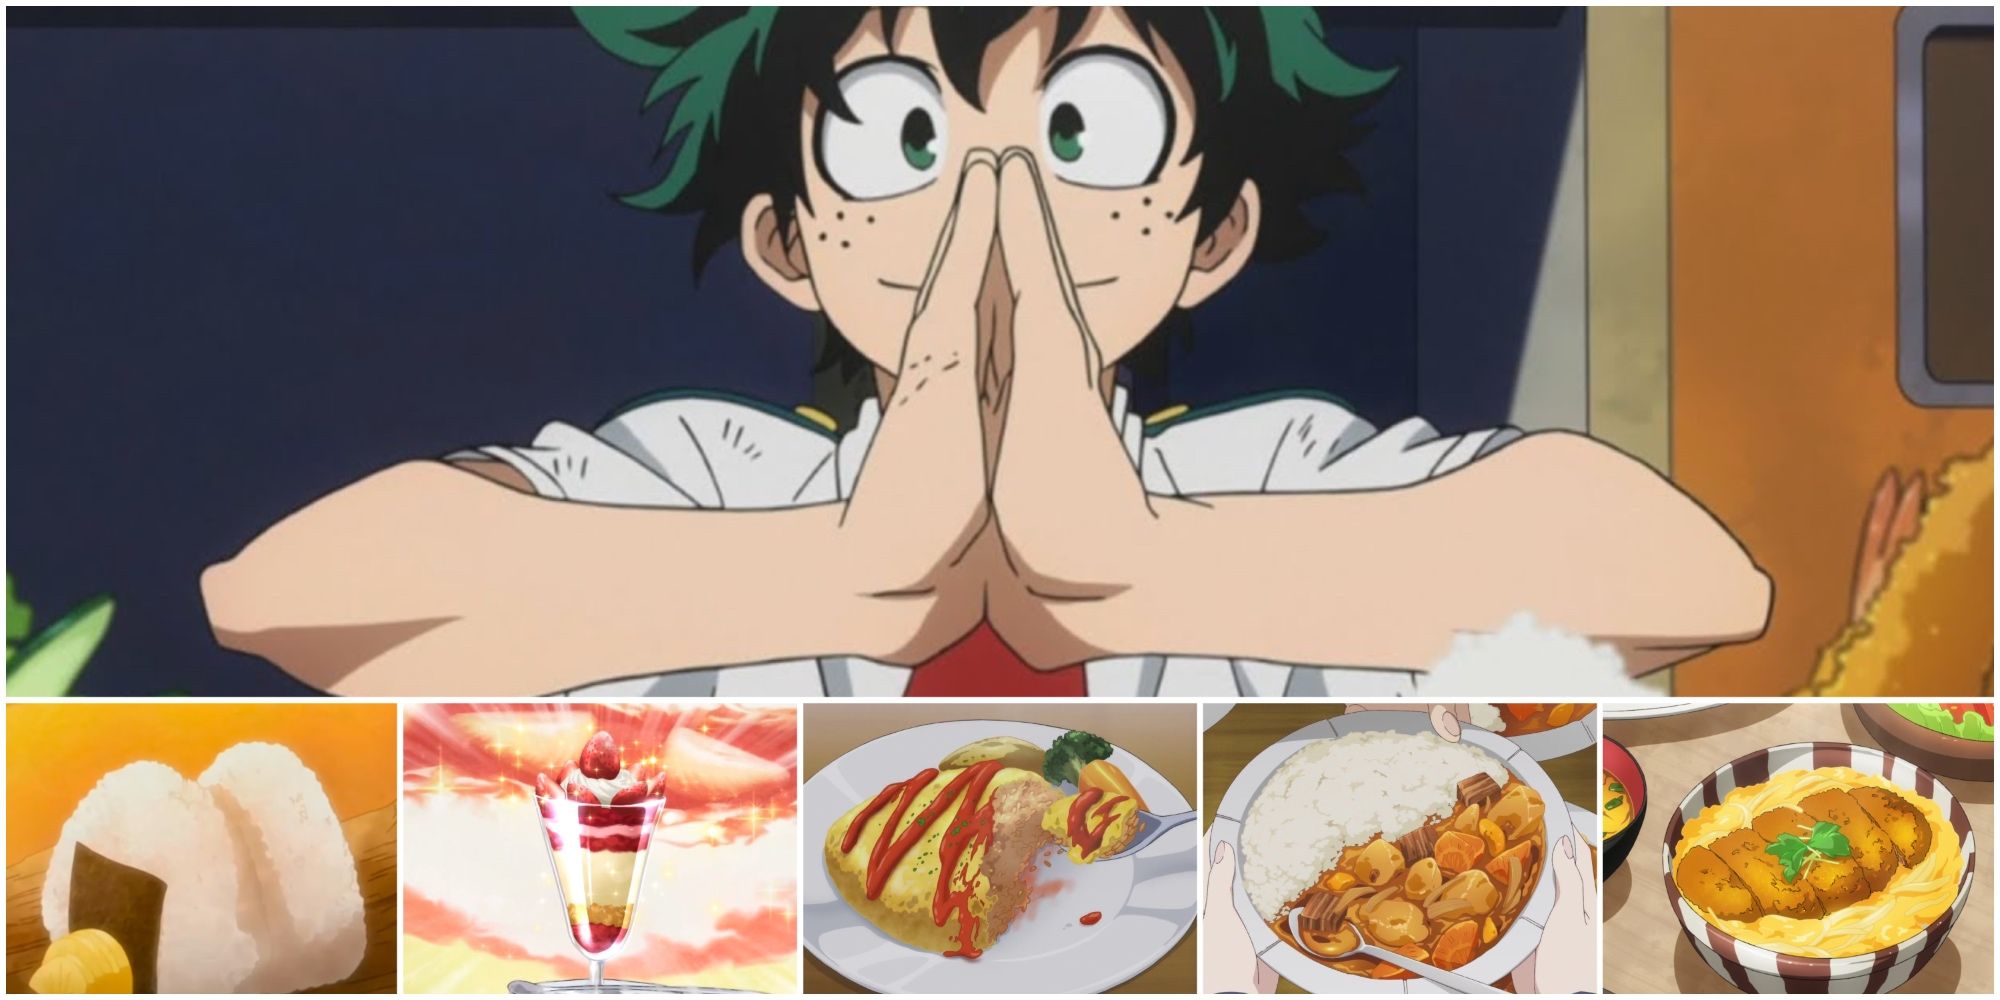 Is there a reason why so many main characters in anime eat a lot food  (Goku, Natsu, Luffy, Naruto when it's ramen)? - Quora